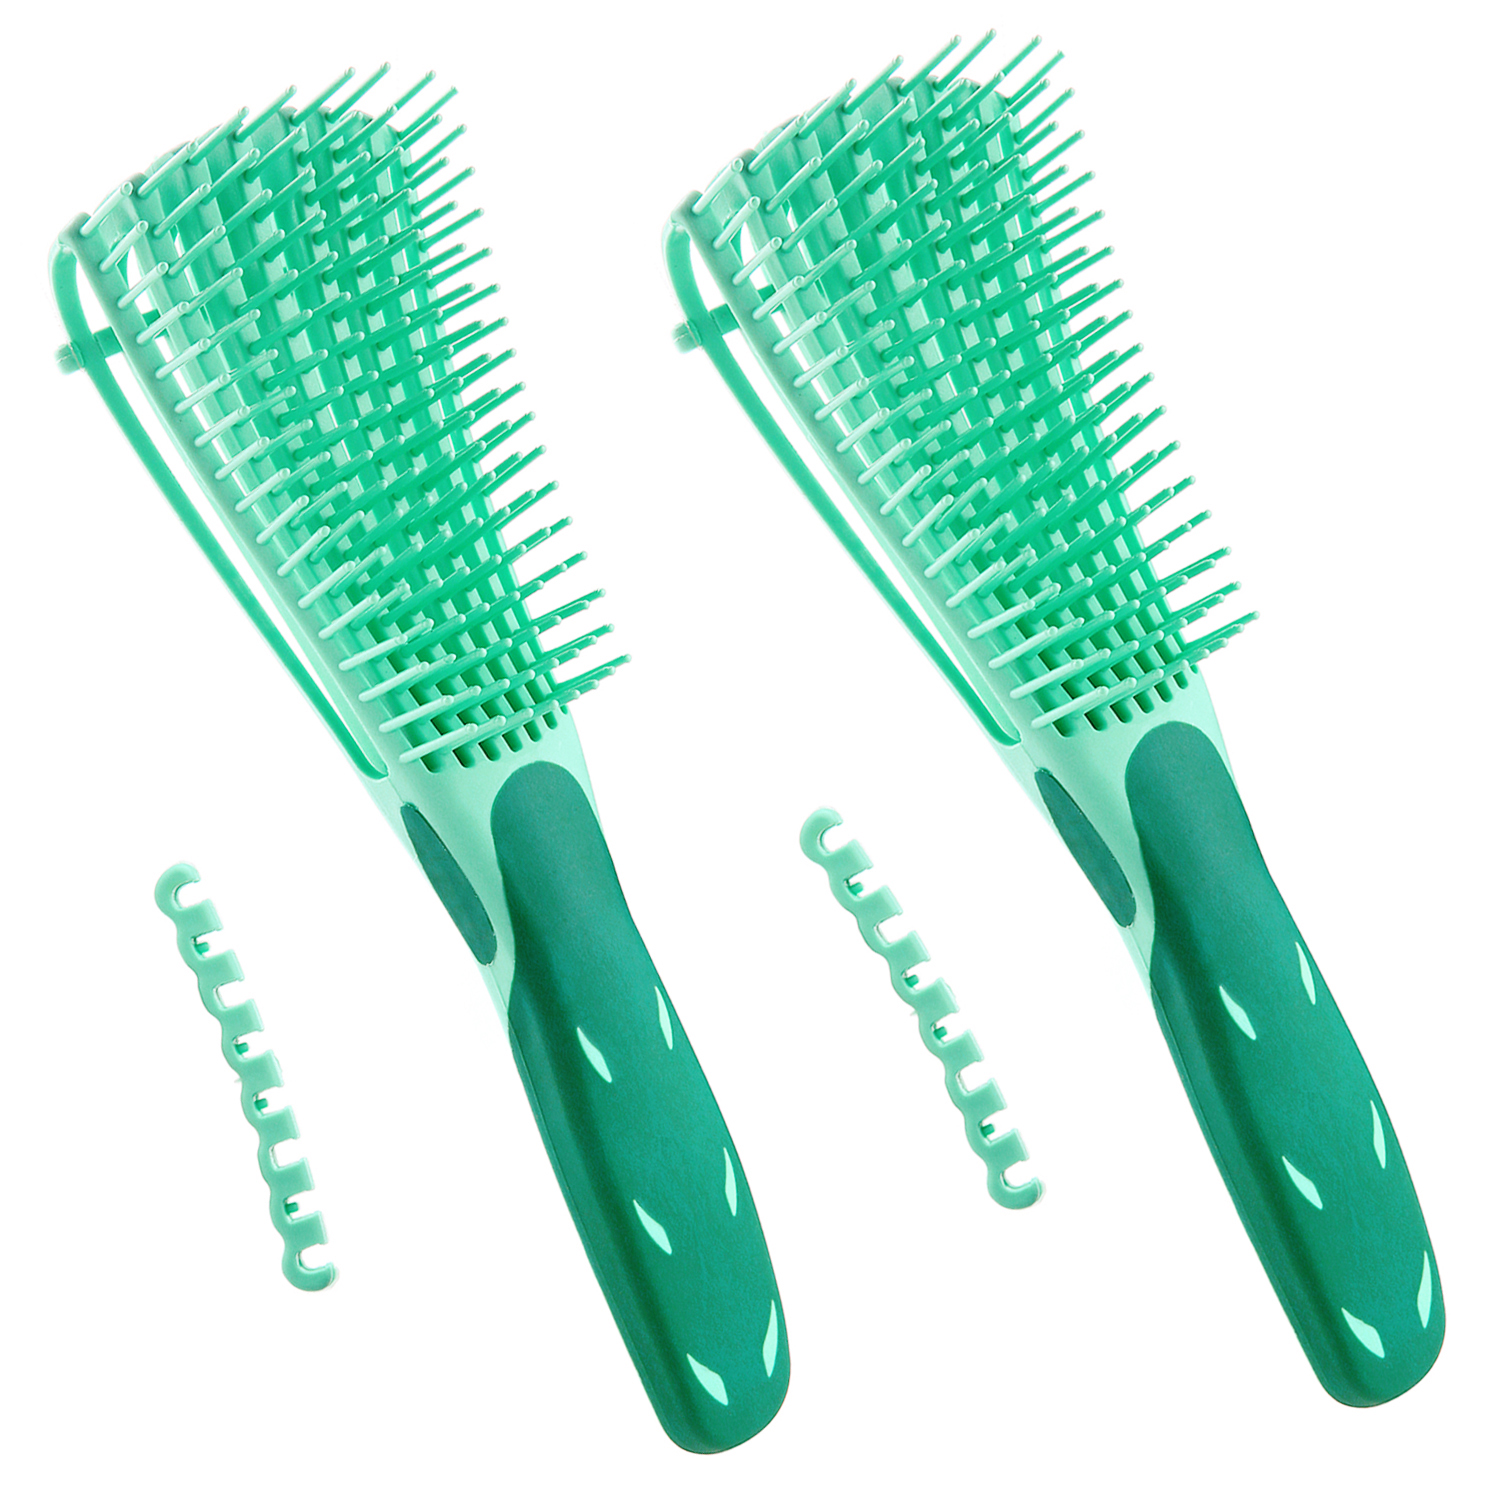 Keador Detangling Brush for Curly Hair, 2 Pack Detangling Brush for Afro America 3a to 4c Kinky Wavy, Curly, Coily Hair, Knots Detangler Easy to Clean (Green) 